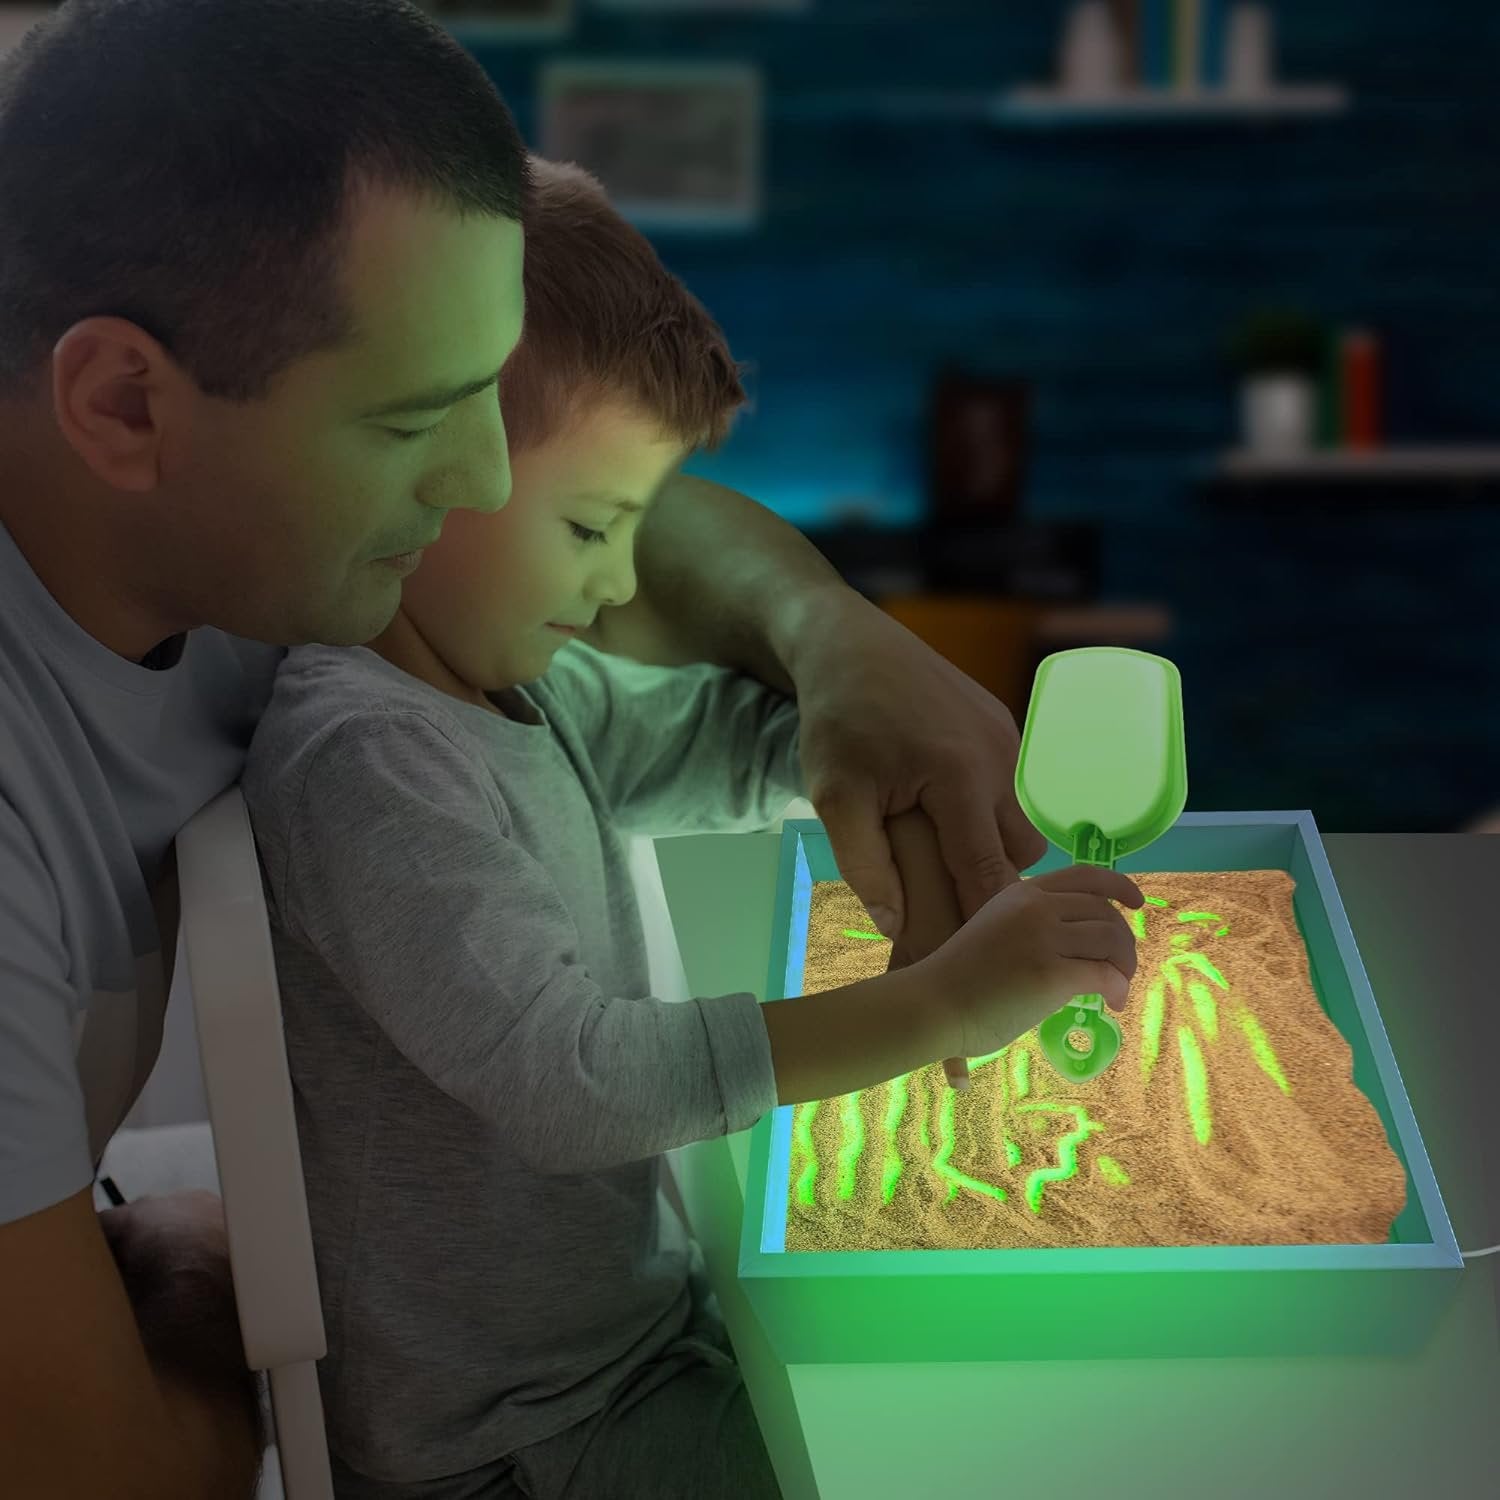 Wood Sand Painting Light Box for Kids, Table LED Sandbox with 3 Light Up Modes and Sand Toys, Art Sand Animation, Relaxing Sensory Play, Exploration, Motor Skills & Learning